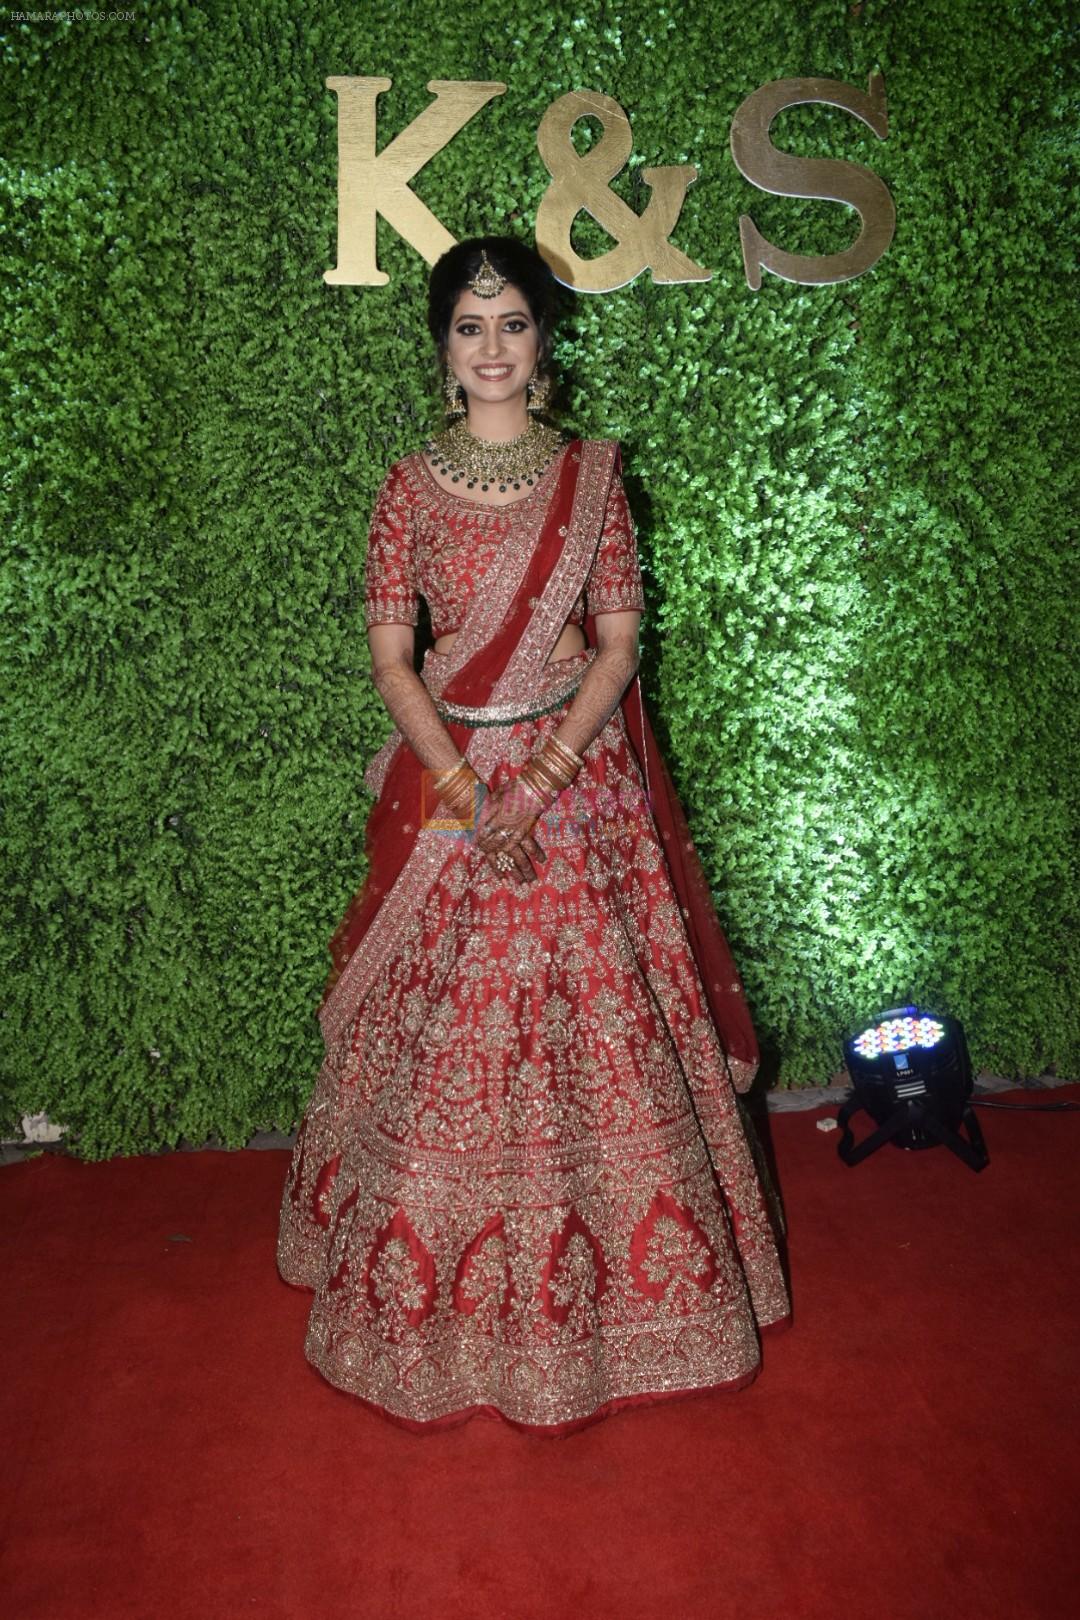 at Sameer Ajaan's daughter's wedding reception at Sun n Sand in juhu on 22nd Jan 2019